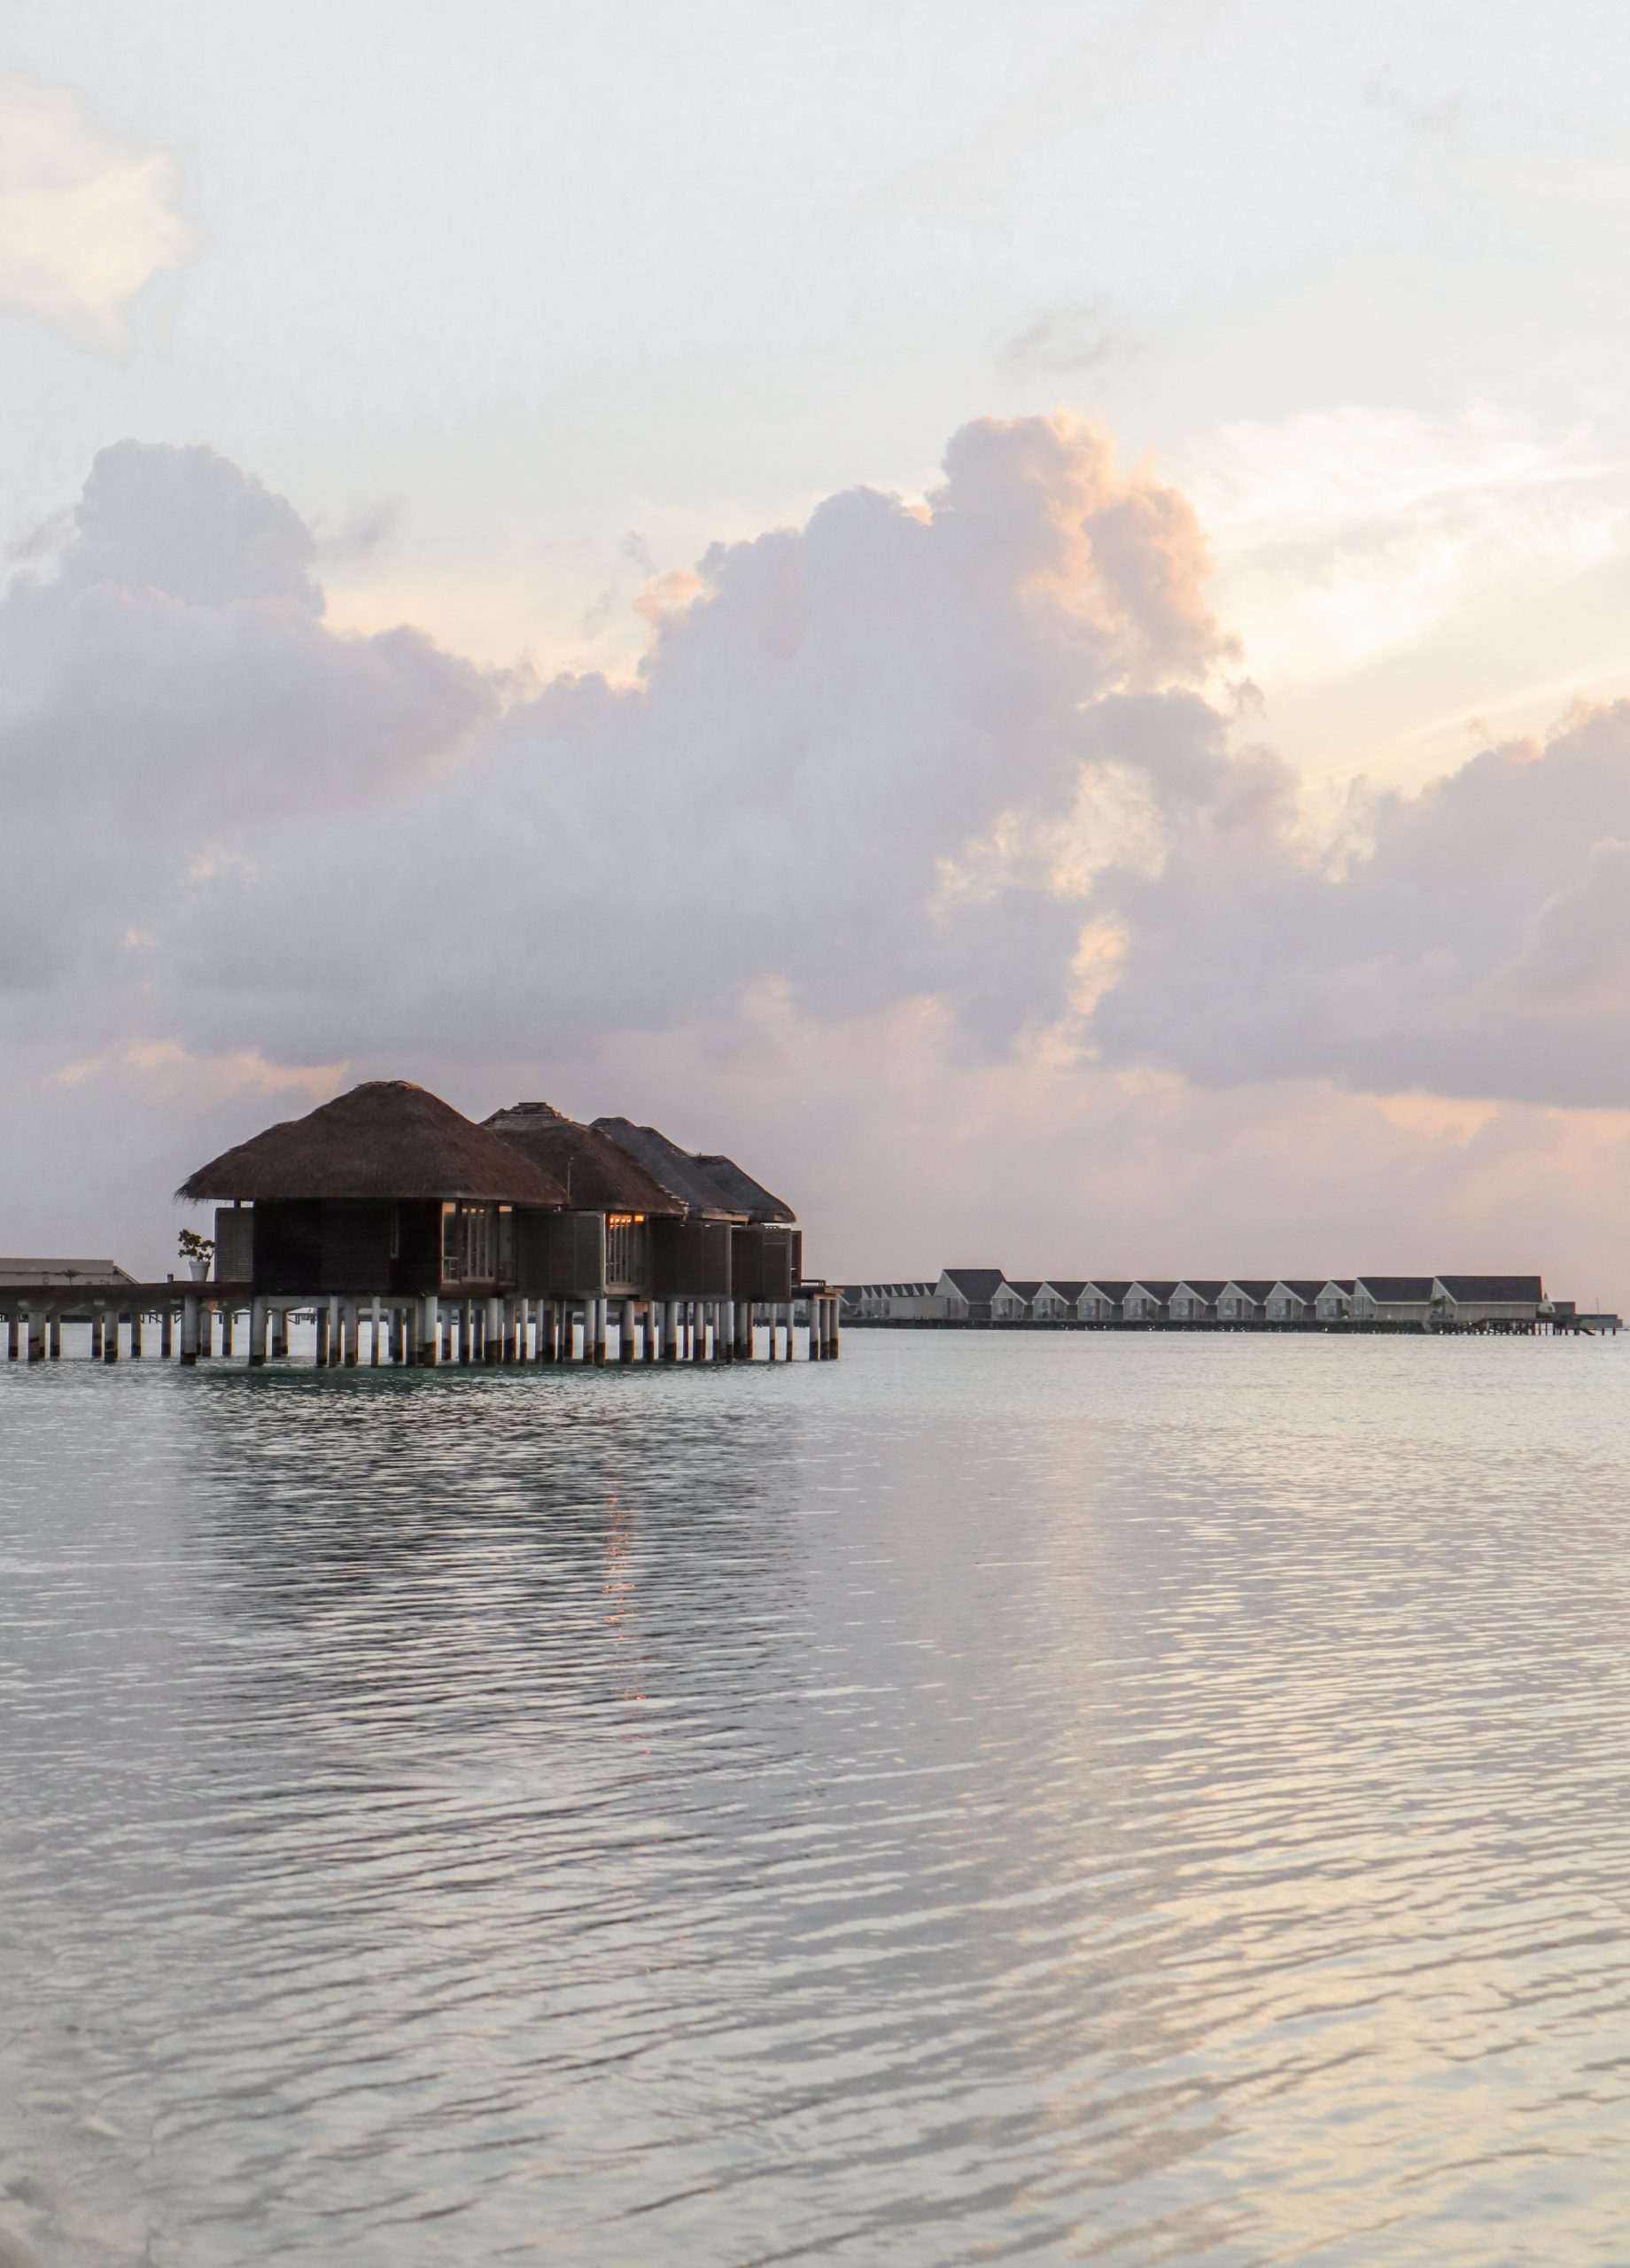 Honeymooning in the Maldives- A Look Inside LUX South Ari Atoll-15